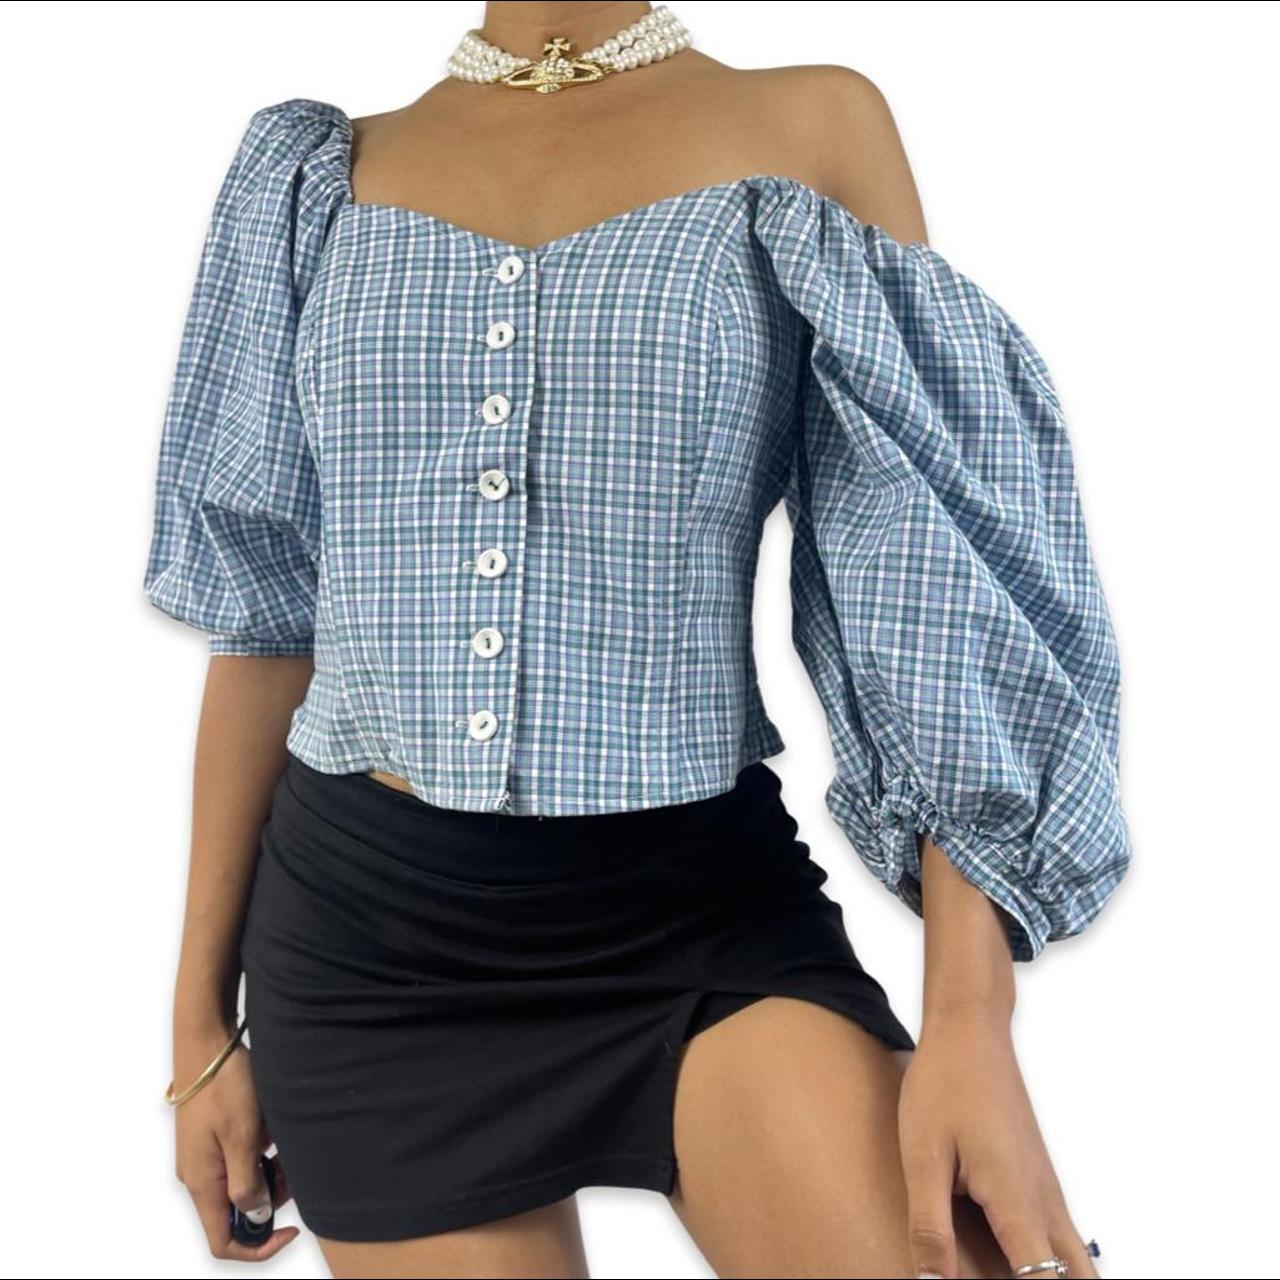 Product Image 1 - VINTAGE 90S MILKMAID TOP

ABOUT THE